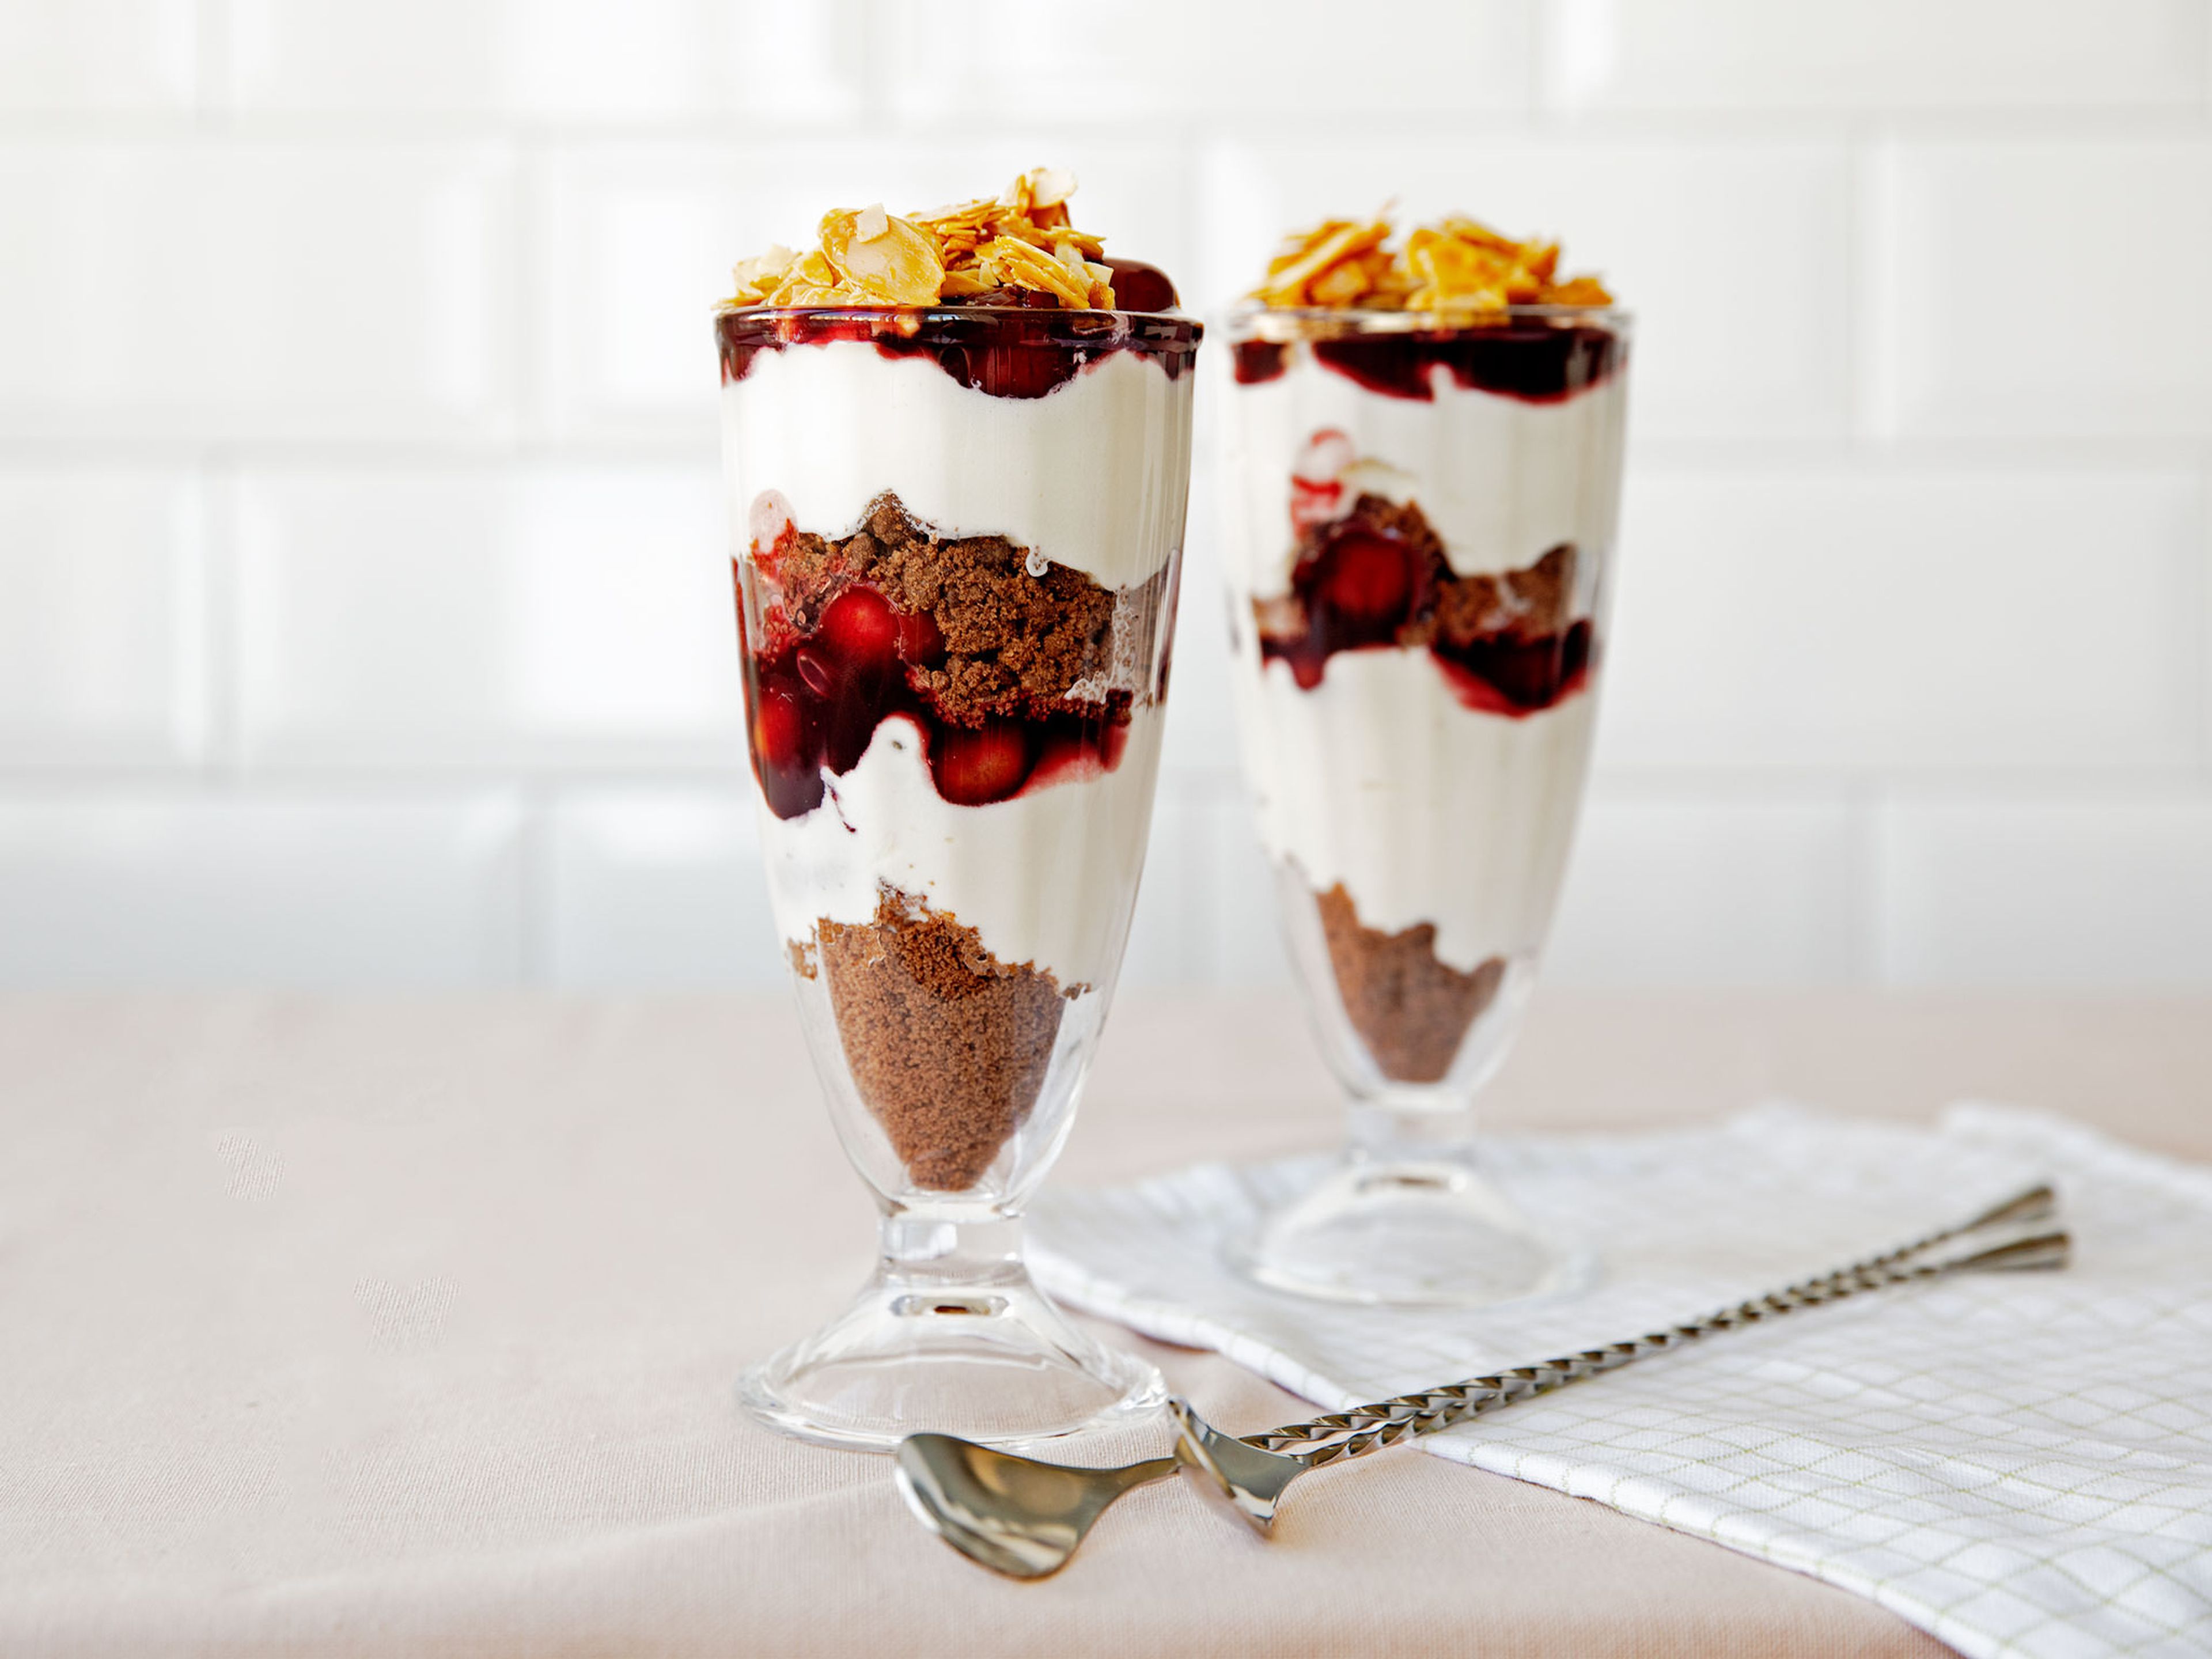 Cherry parfait with chocolate cookies